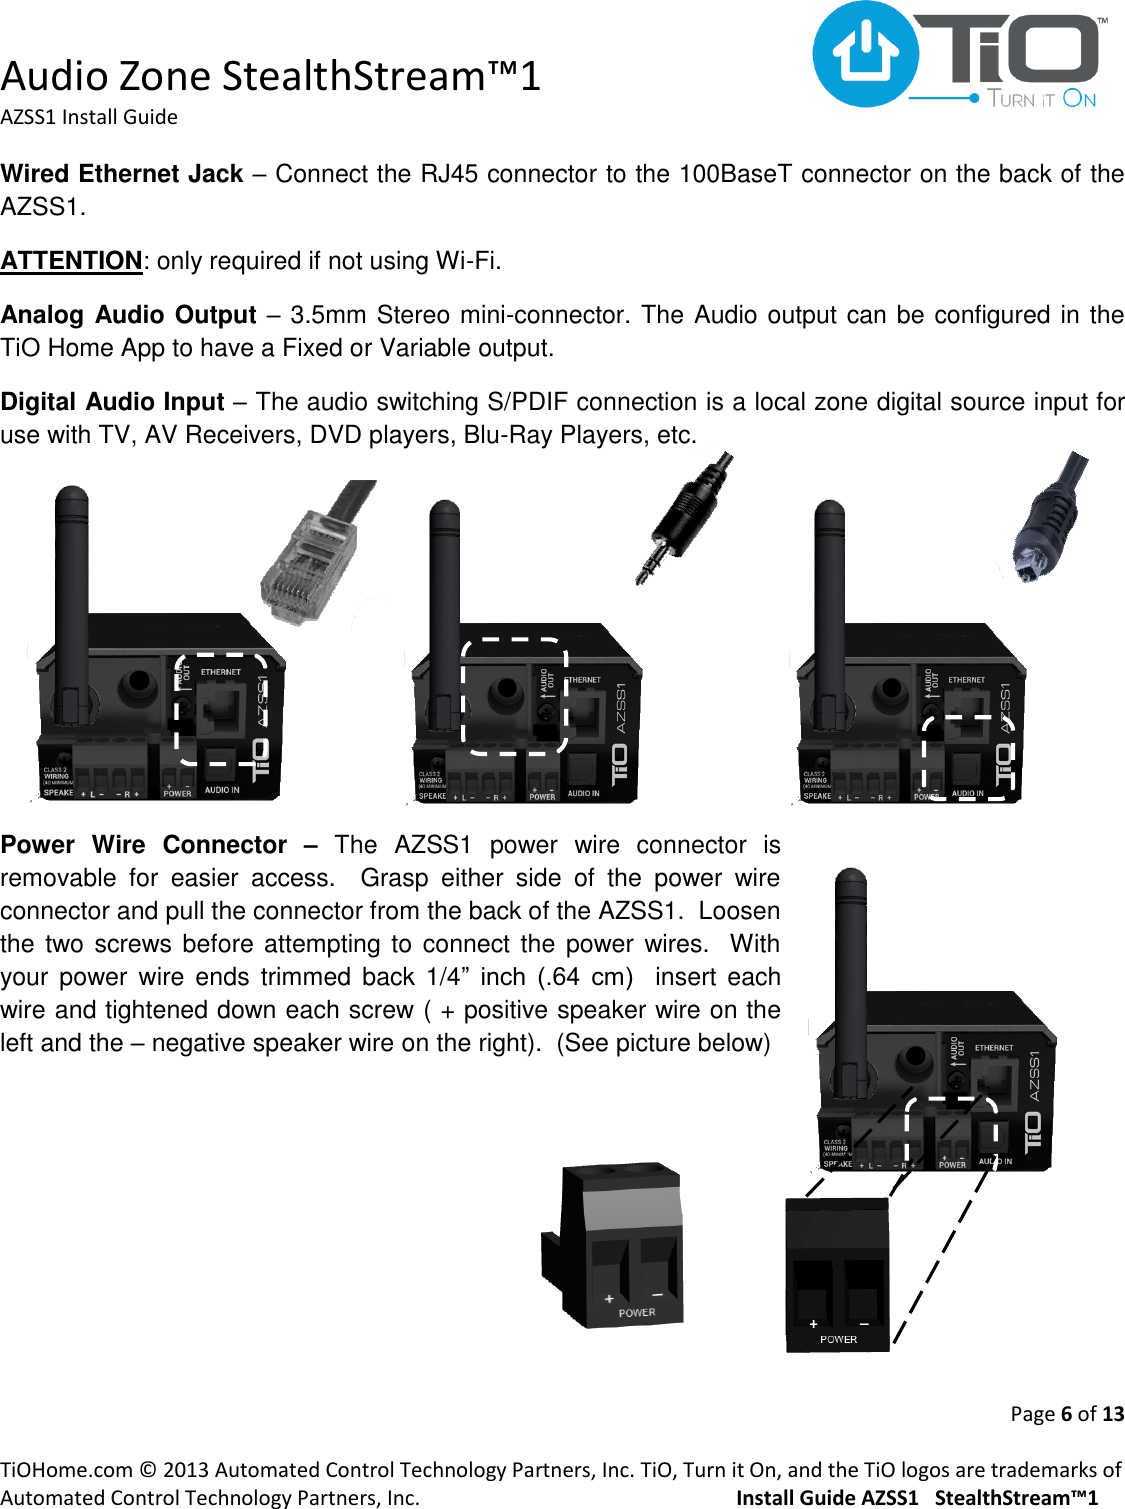  Audio Zone StealthStream™1 AZSS1 Install Guide  Page 6 of 13  TiOHome.com © 2013 Automated Control Technology Partners, Inc. TiO, Turn it On, and the TiO logos are trademarks of Automated Control Technology Partners, Inc.                                                  Install Guide AZSS1   StealthStream™1 Wired Ethernet Jack – Connect the RJ45 connector to the 100BaseT connector on the back of the AZSS1.  ATTENTION: only required if not using Wi-Fi. Analog Audio Output – 3.5mm Stereo mini-connector. The Audio output can be configured in the TiO Home App to have a Fixed or Variable output. Digital Audio Input – The audio switching S/PDIF connection is a local zone digital source input for use with TV, AV Receivers, DVD players, Blu-Ray Players, etc.        Power  Wire  Connector  – The  AZSS1  power  wire  connector  is removable  for  easier  access.    Grasp  either  side  of  the  power  wire connector and pull the connector from the back of the AZSS1.  Loosen the two screws before attempting to  connect the  power wires.  With your power  wire  ends  trimmed  back  1/4”  inch  (.64  cm)    insert  each wire and tightened down each screw ( + positive speaker wire on the left and the – negative speaker wire on the right).  (See picture below)    